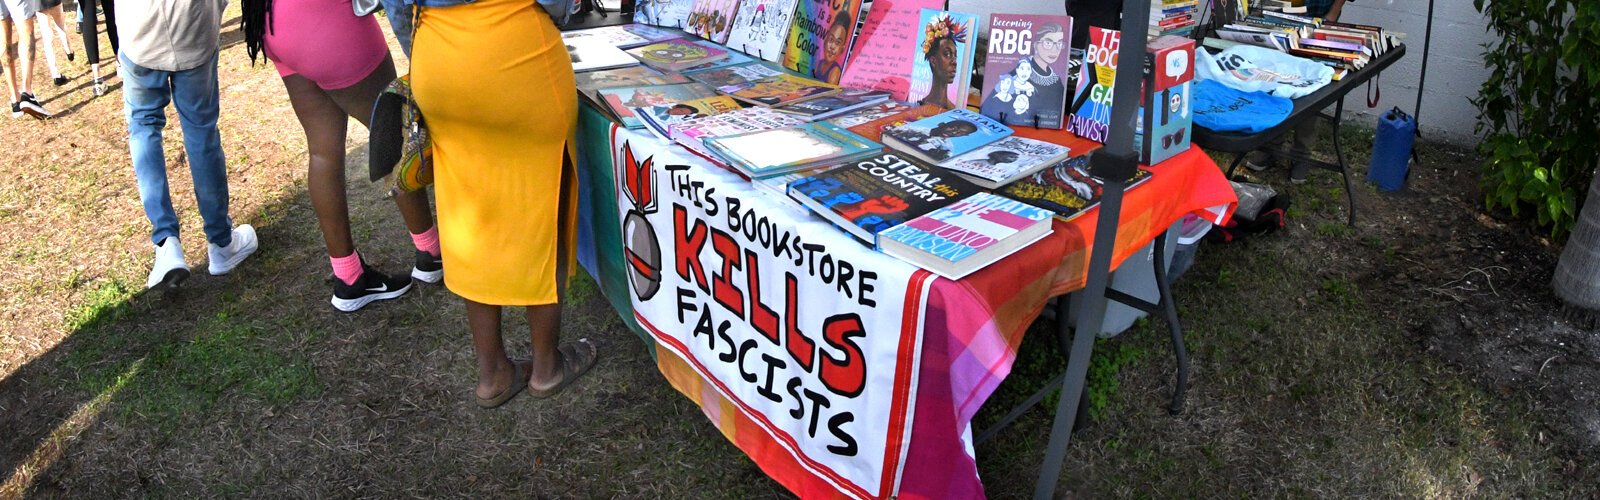 Capturing people’s attention with the name “This Bookstore Kills Fascists," a selection of books banned from schools and libraries across the United States attracts a crowd at the Indie Flea St. Pete.